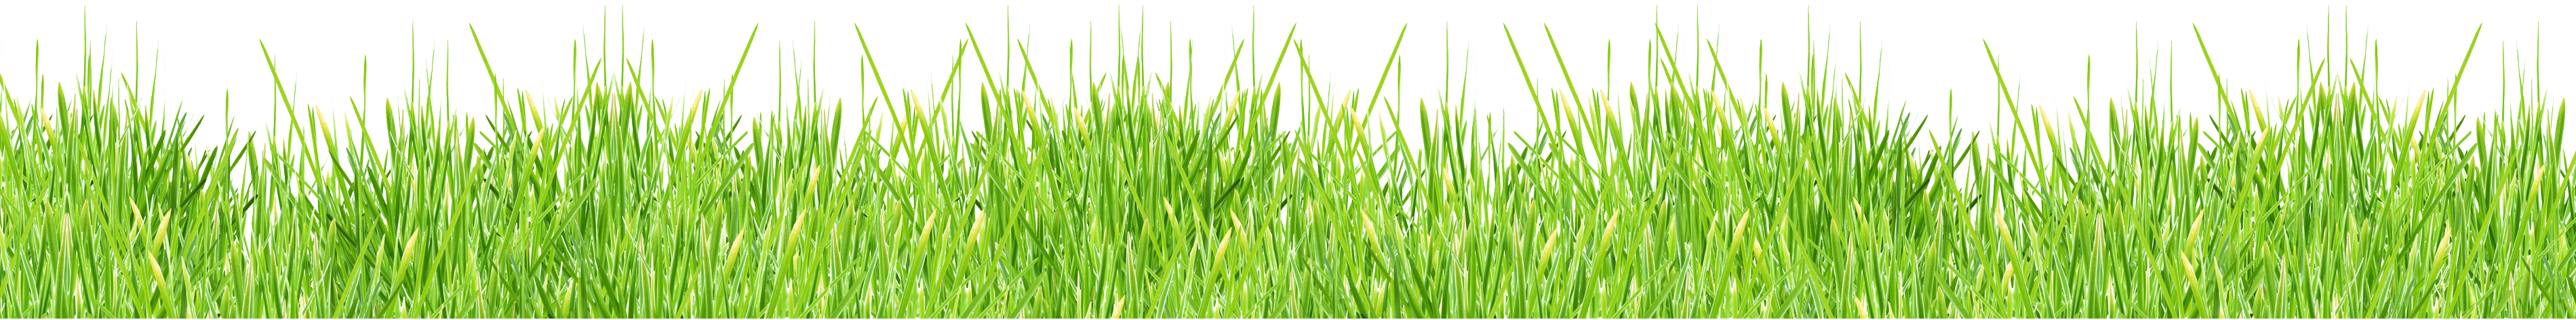 Png images pictures image. Land clipart cloud grass background